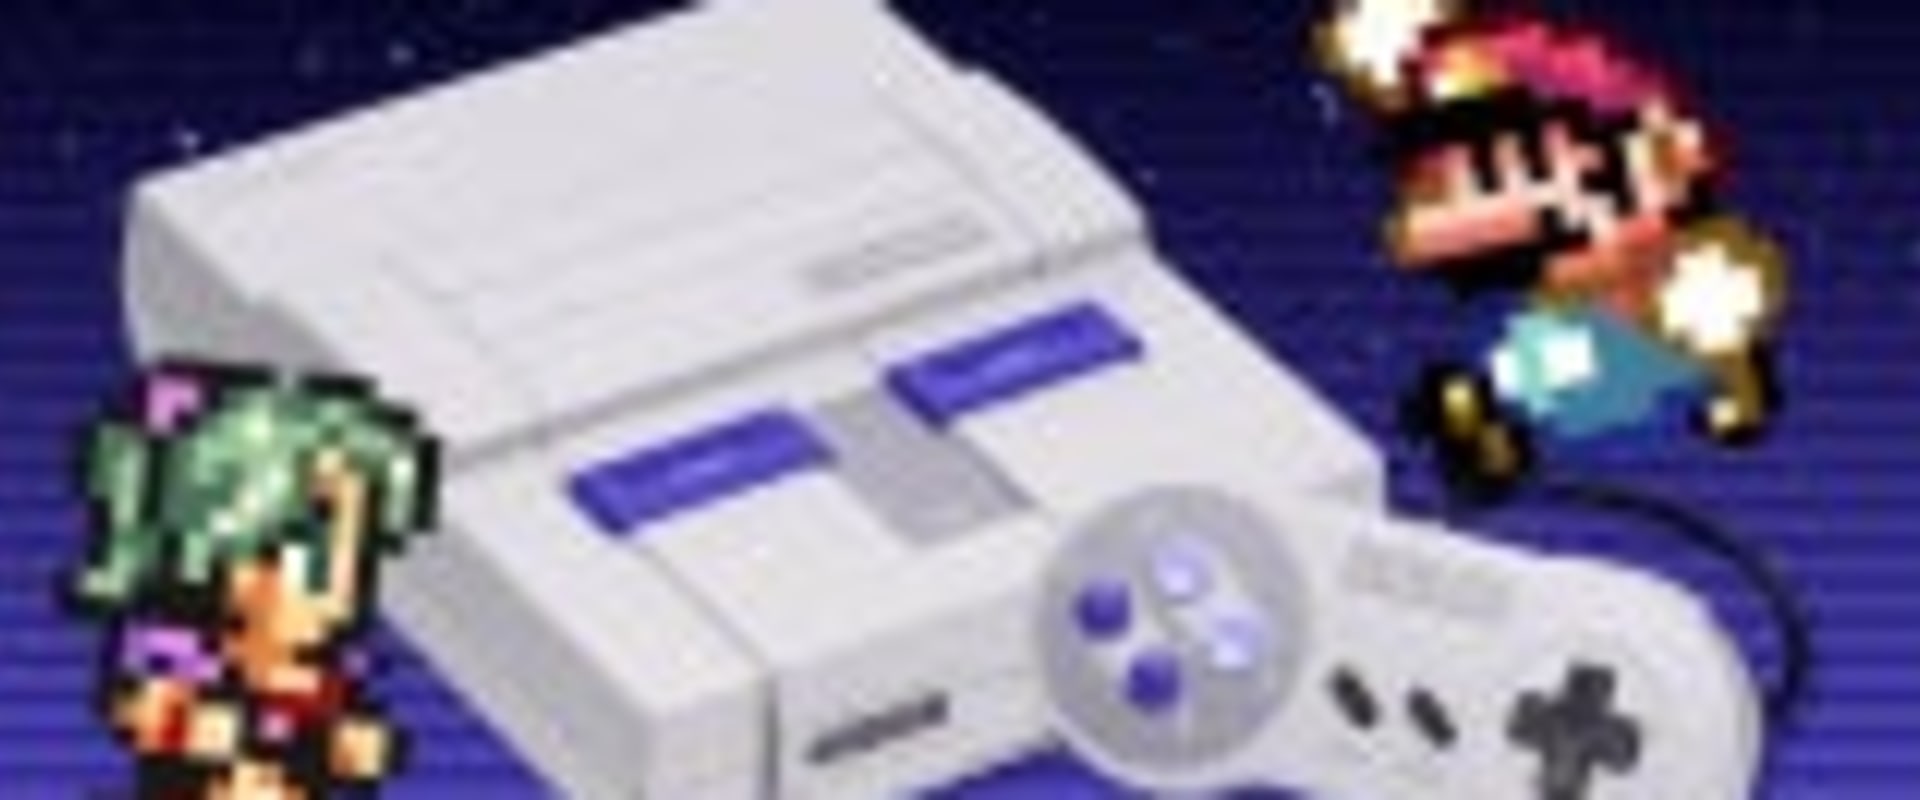 SNES: A Look at the Classic Video Game System